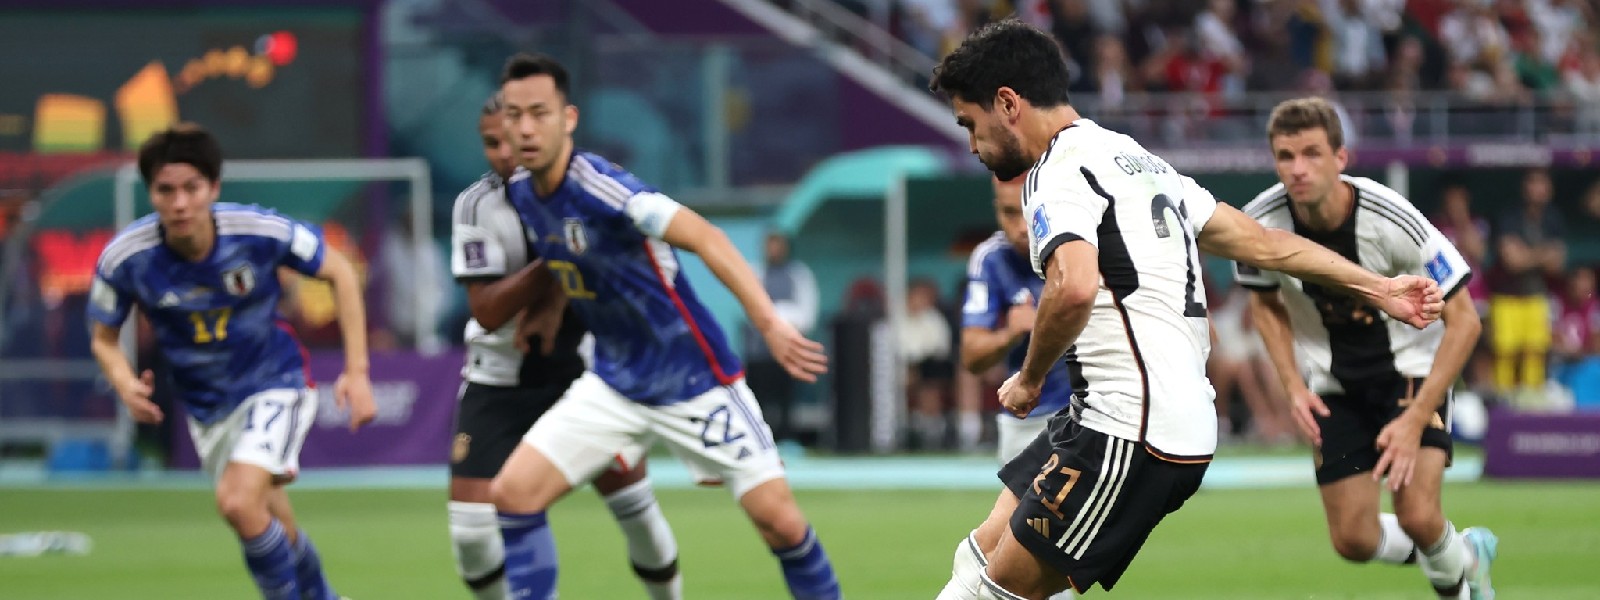 FIFA World Cup: Japan upset Germany in 2-1 thriller